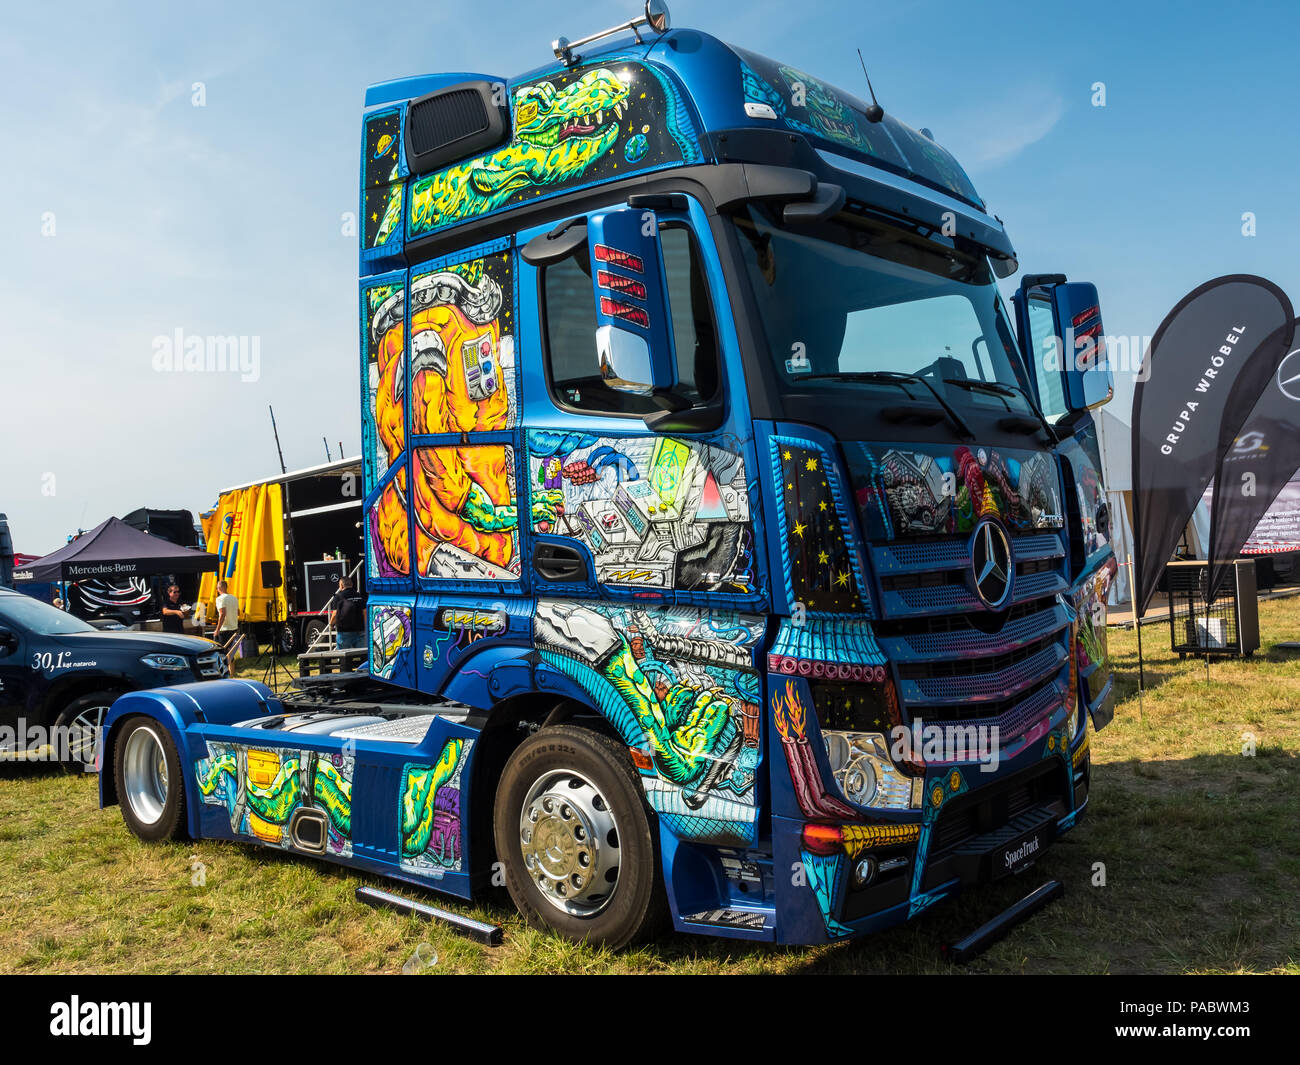 Master Truck Show 20-22.07. 2018 Poland , Opole, Polska Nowa Wieś. Truck cabin painted in various colors Stock Photo